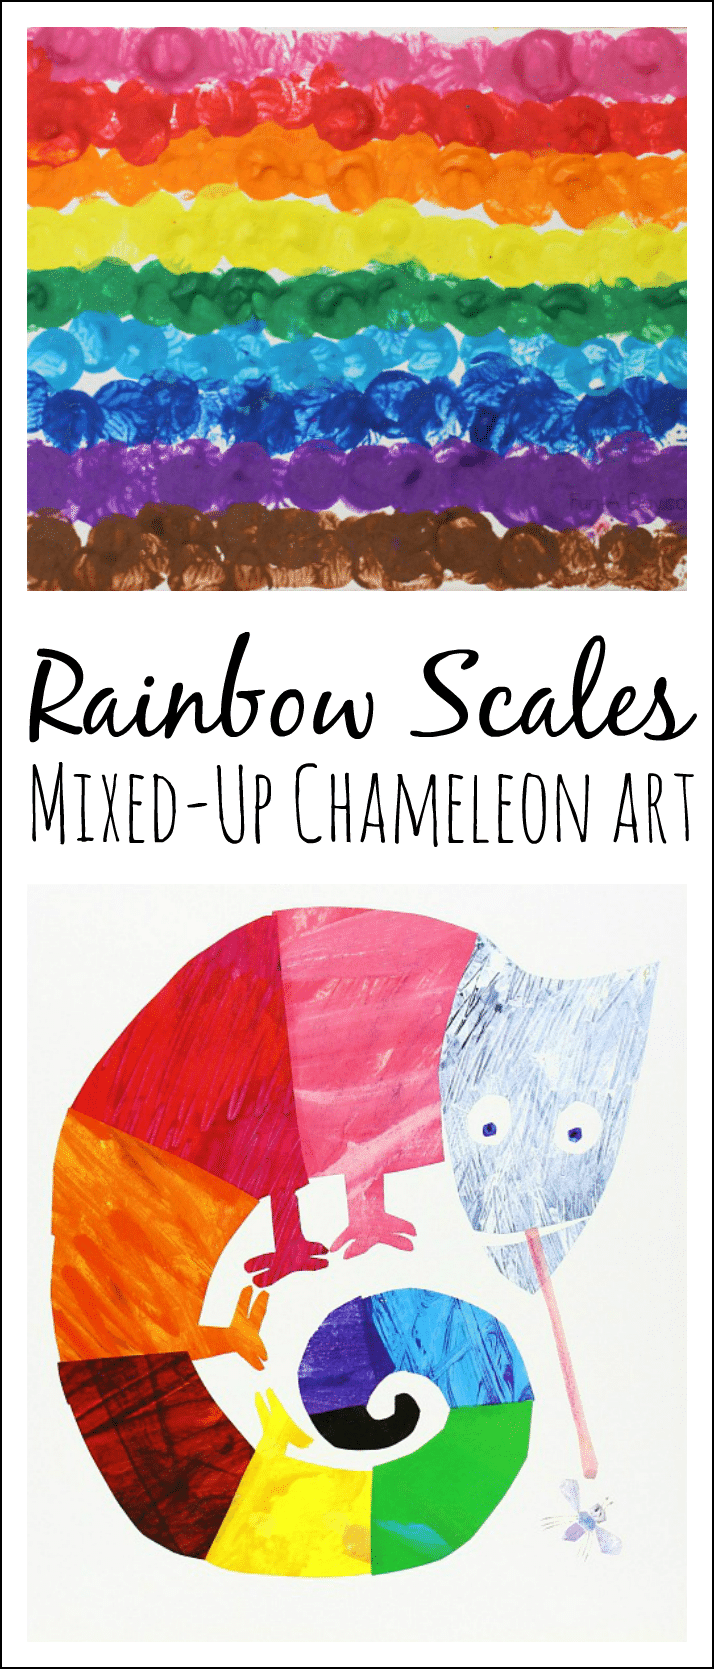 mixed up chameleon activity with paint and text that reads rainbow scales mixed up chameleon art